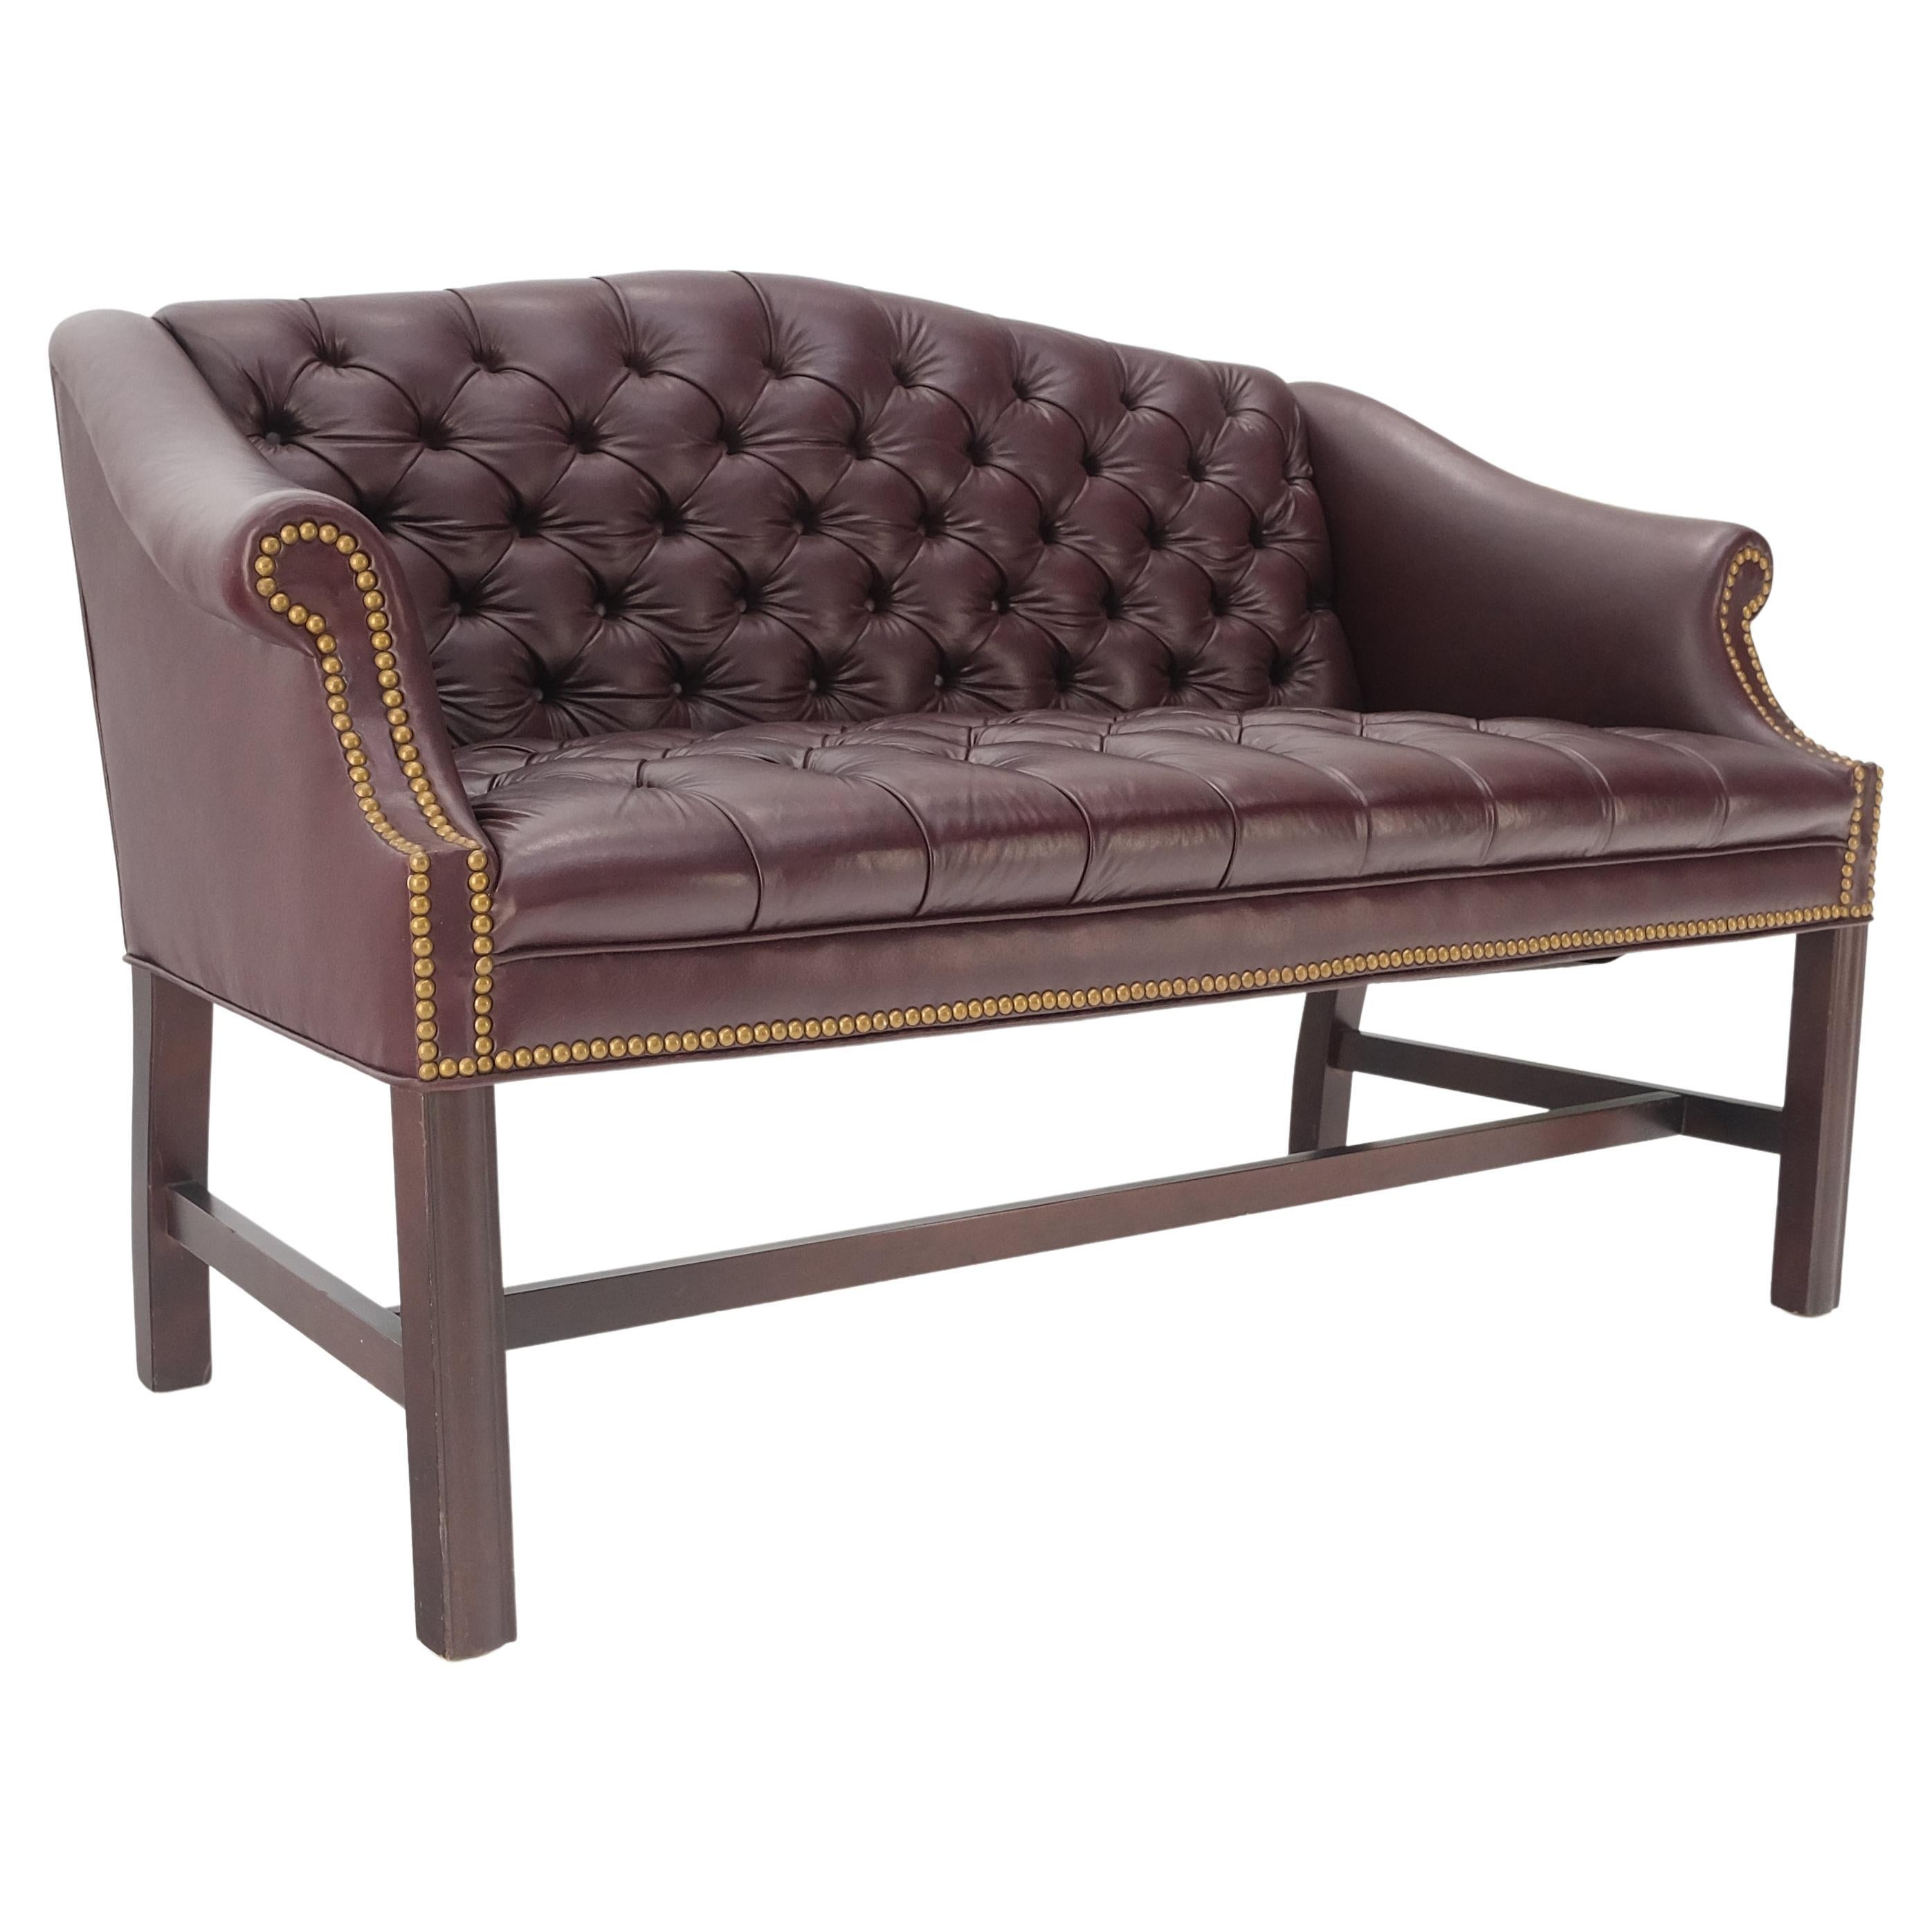 Tufted Burgundy Leather Federal Style Settee Love Seat Couch Sofa MINT! For Sale